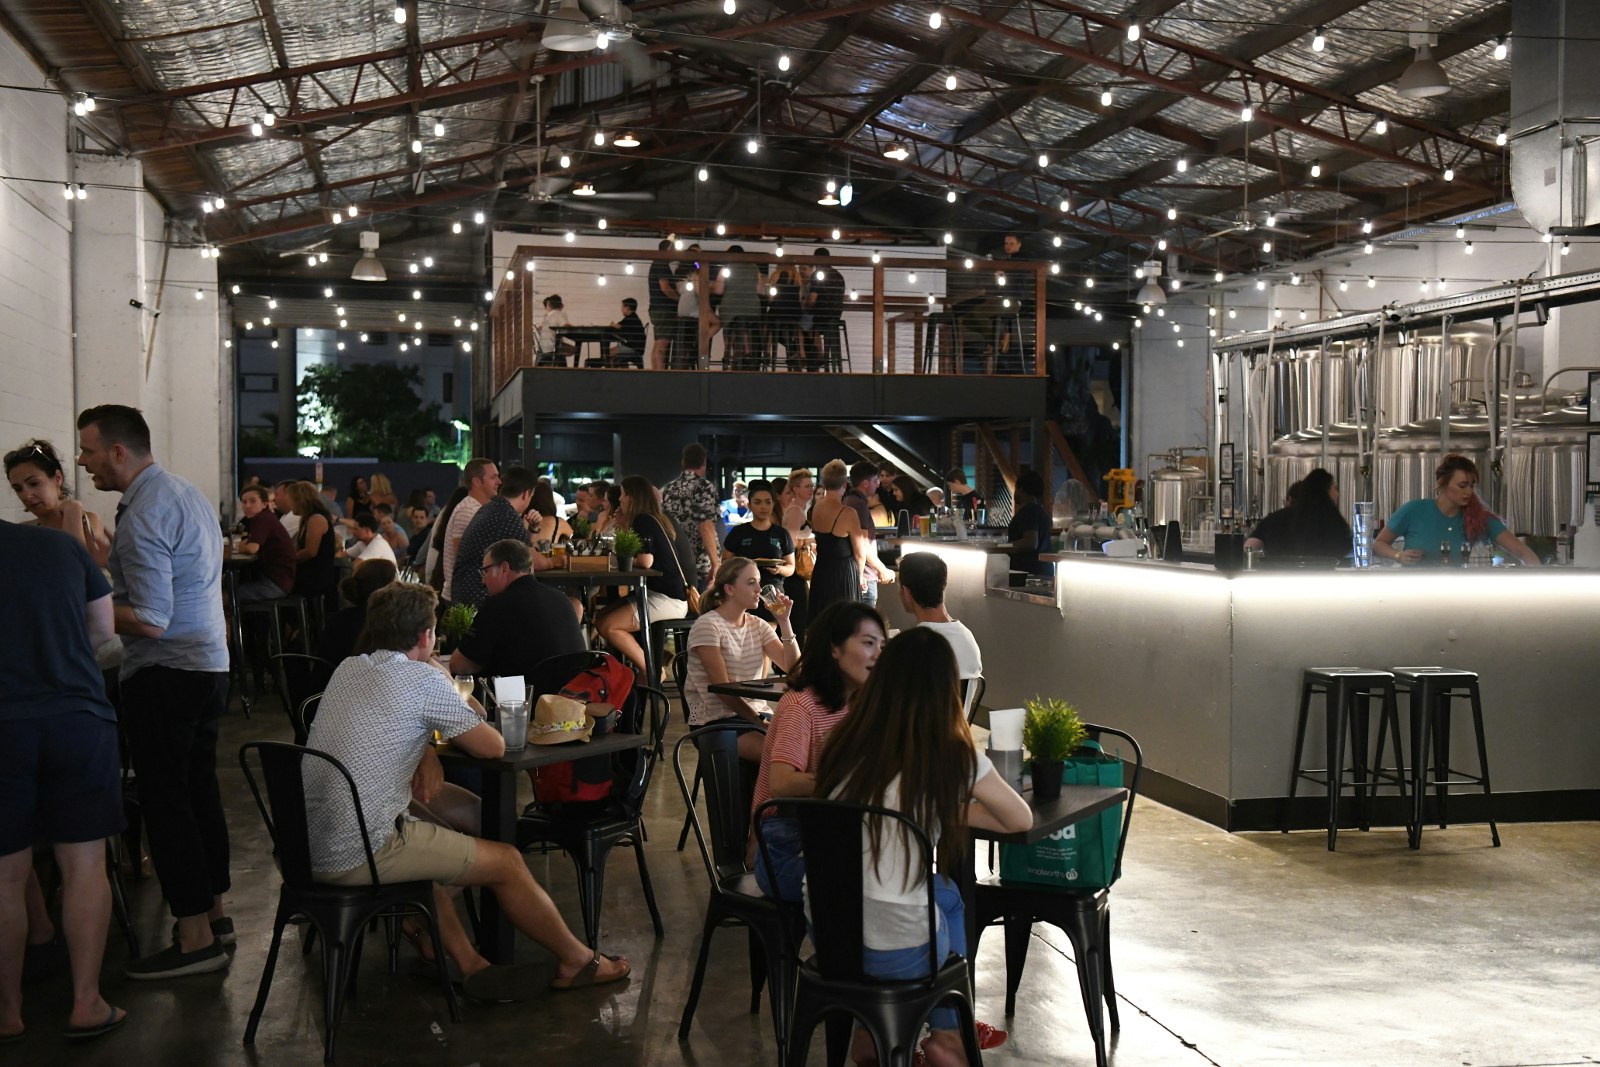 A large, industrial-feeling space with vaulted steel roof is filled with people eating, drinking and socialising.